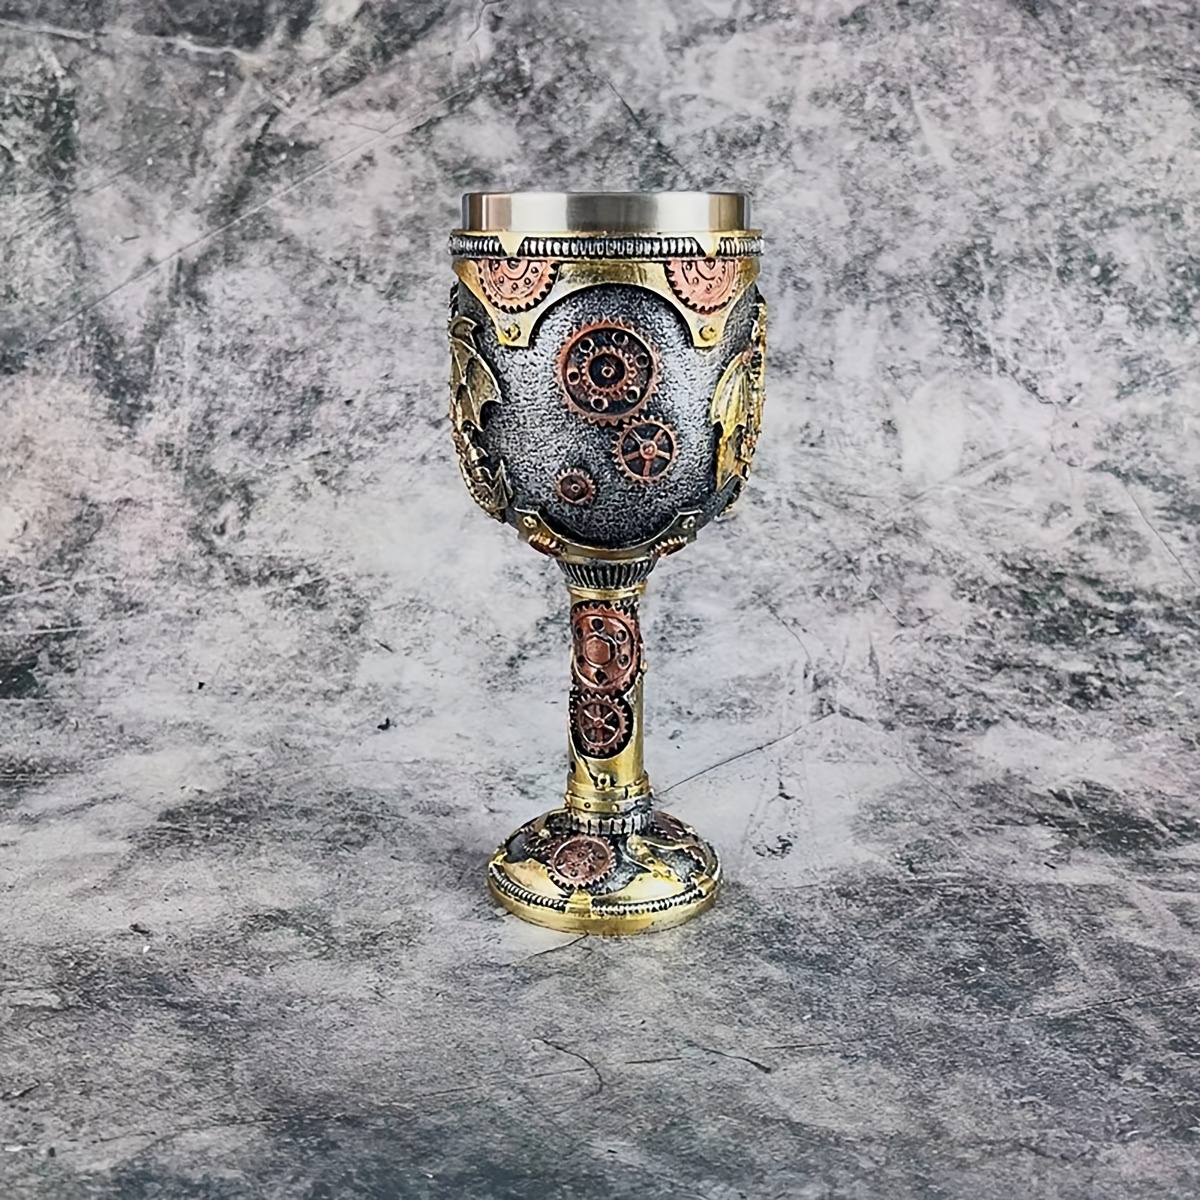 Pure Copper Cup Brass Wine Cup Mini Holy Water Offering Cup Crafts  Ornaments Gift Home Decorations, Vintage Goblet Chalice,european Liquor Cup Metal  Wine Glass Wine Goblet Glasses For Party Wedding Graduation Anniversary